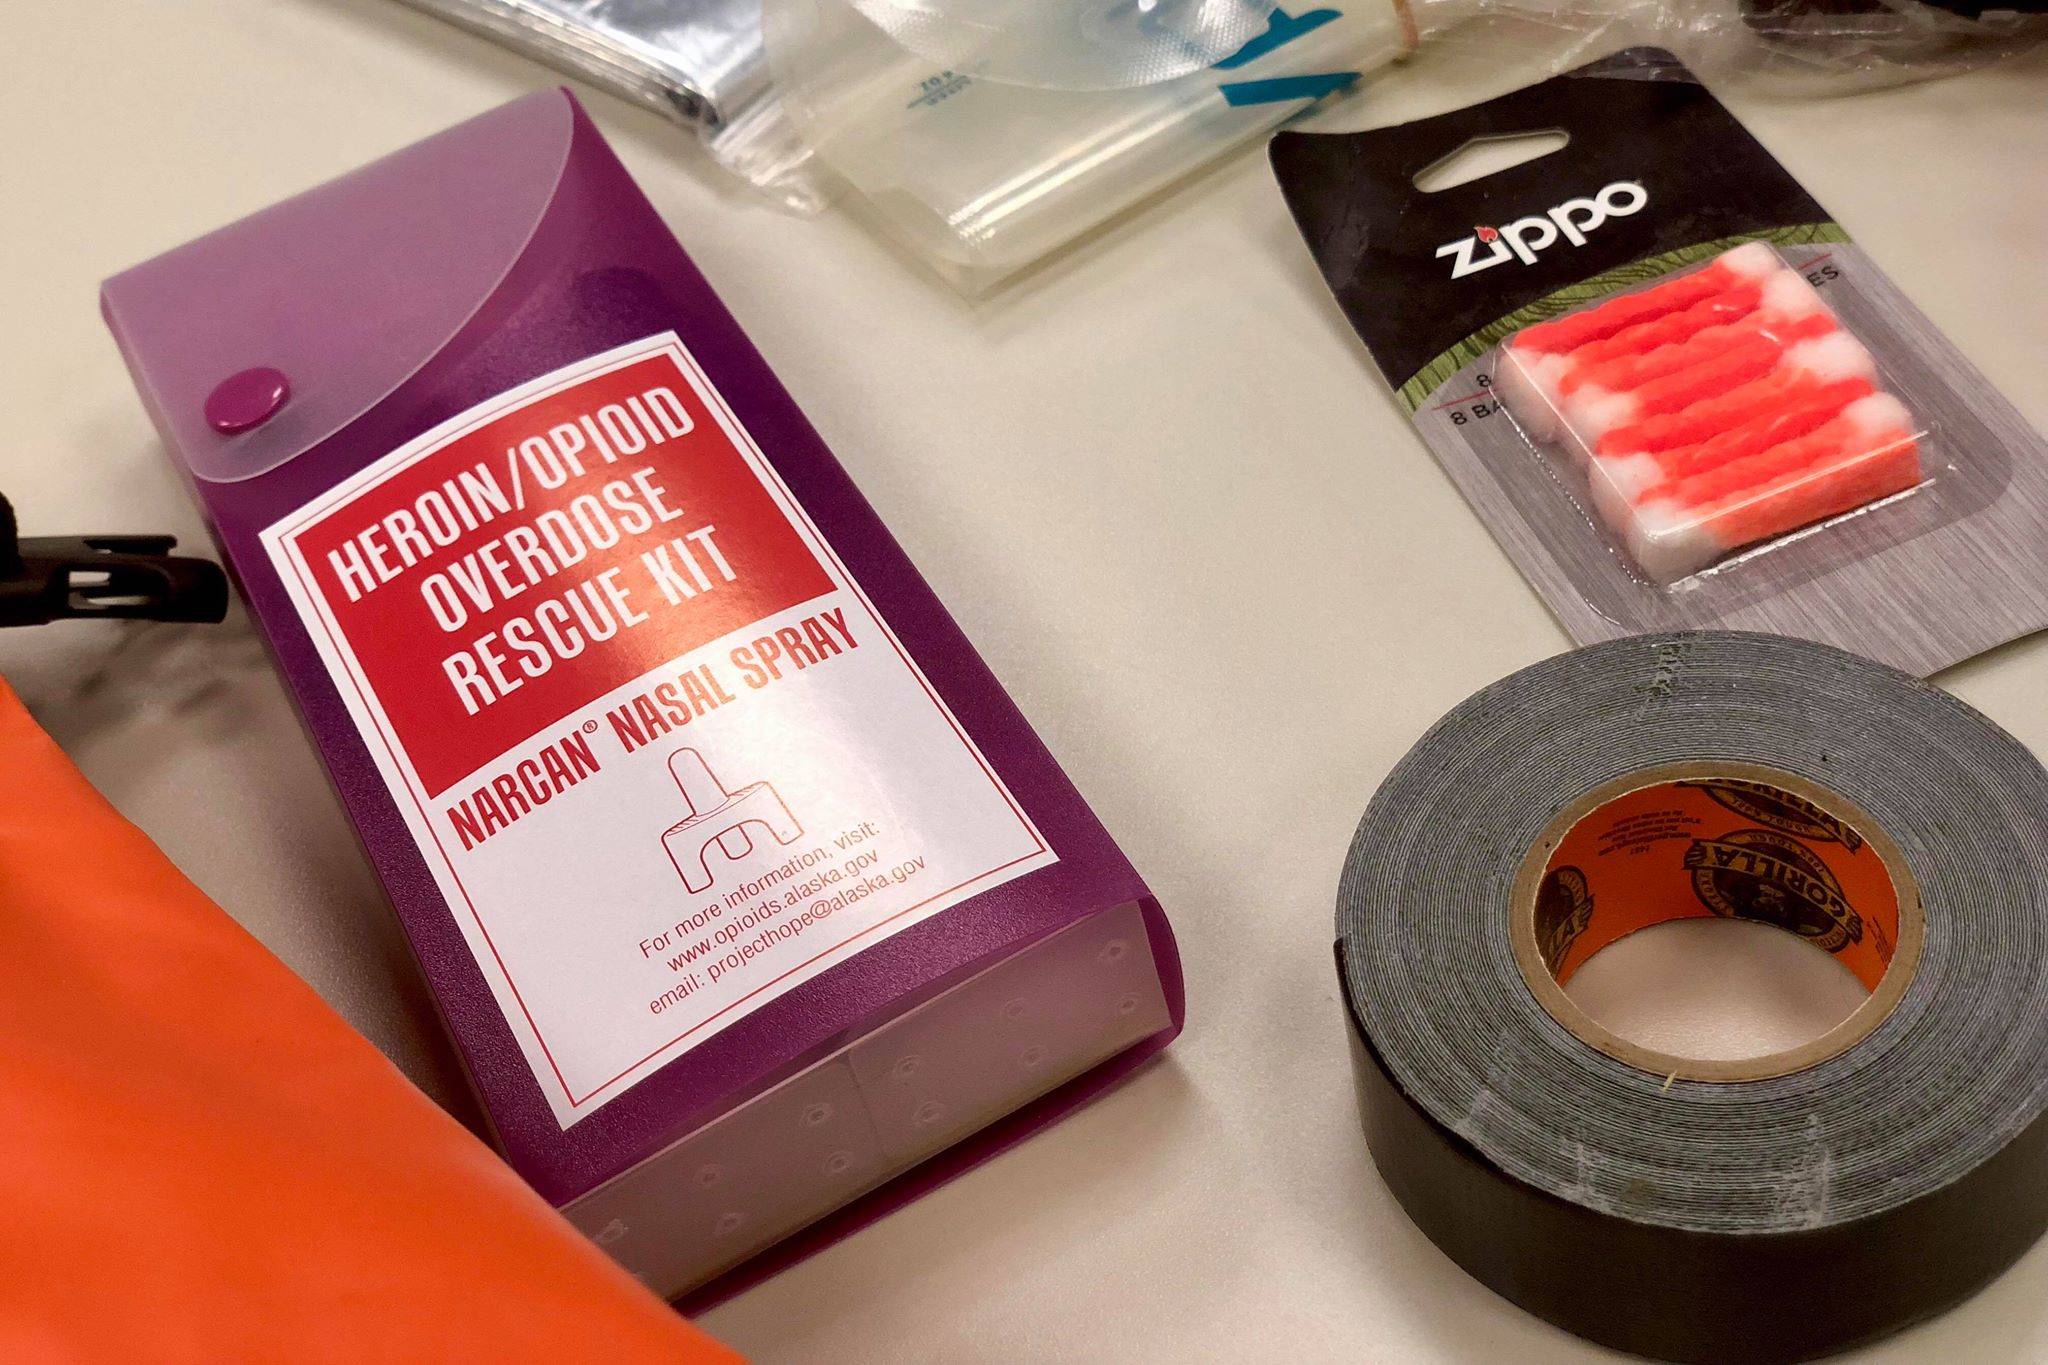 A Narcan kit can be used to reverse the effects of an opioid-related overdose, on Thursday, Oct. 18, 2018, in Kenai, AK. (Photo by Victoria Petersen/Peninsula Clarion)